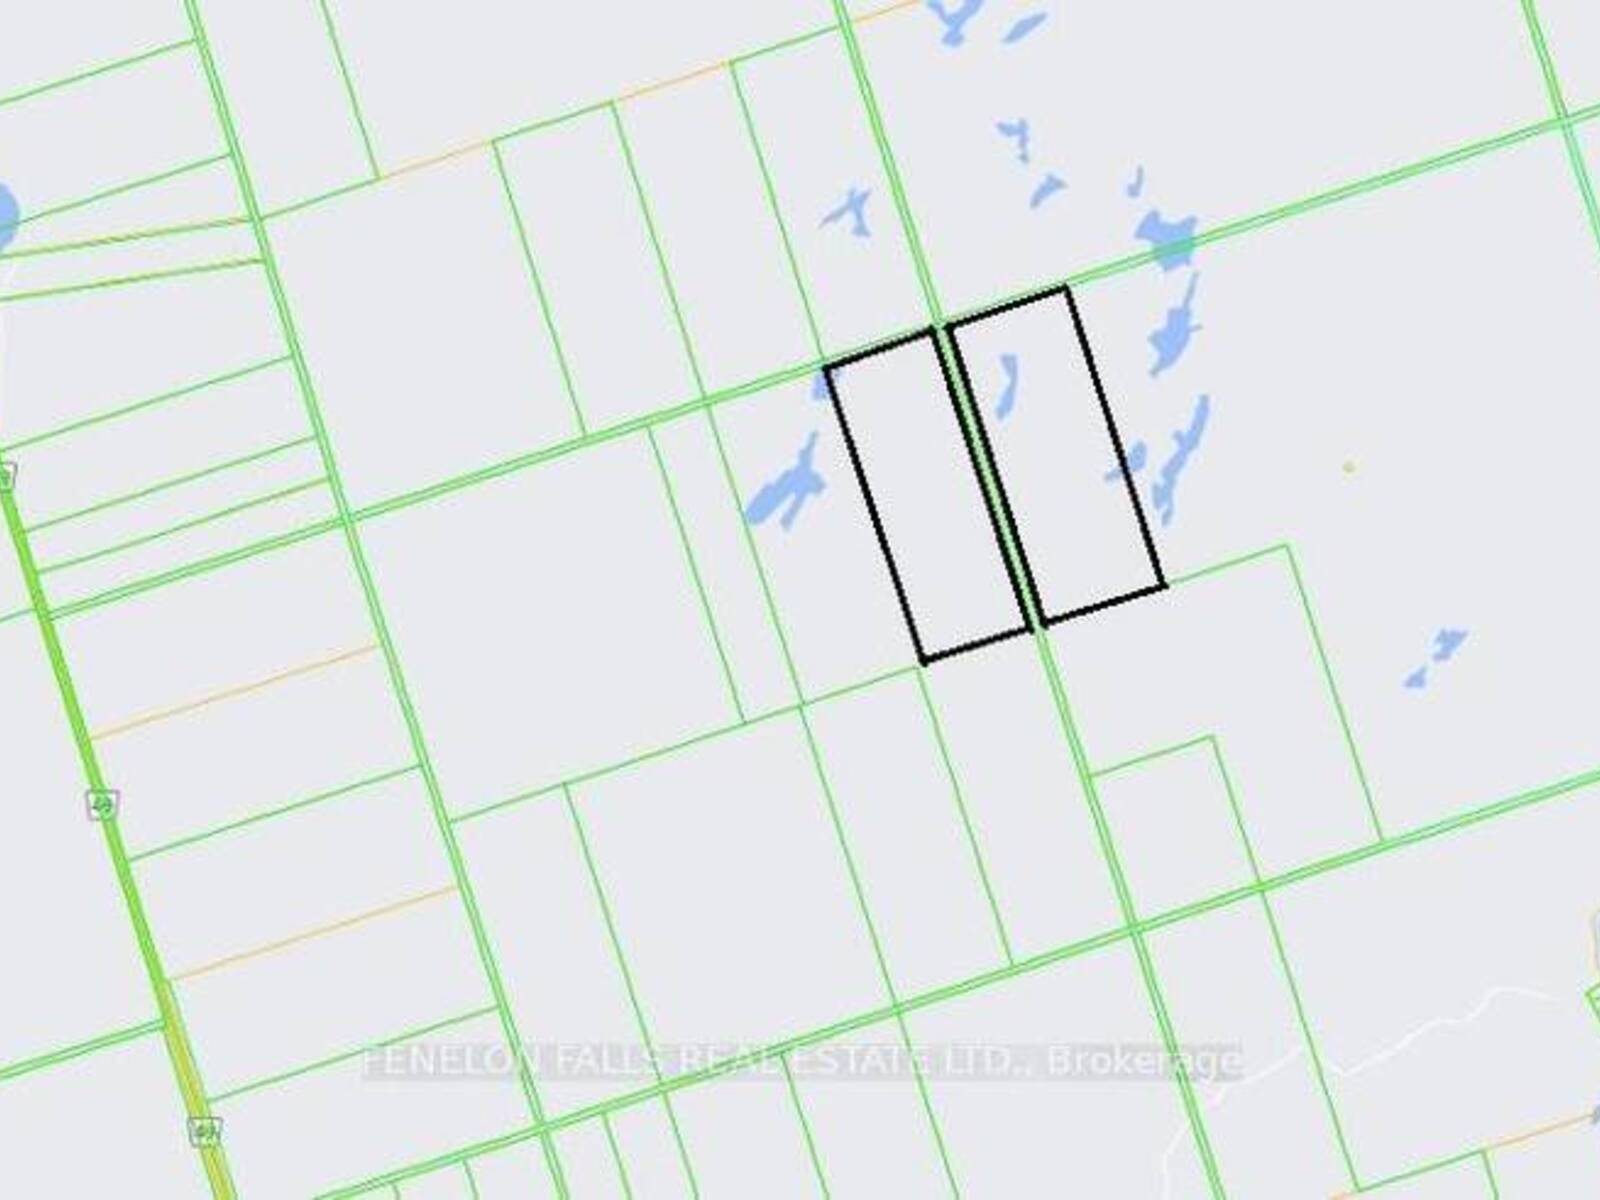 LOT 5 CONCESSION 6 GALWAY, Galway-Cavendish and Harvey, Ontario K0M 1C0